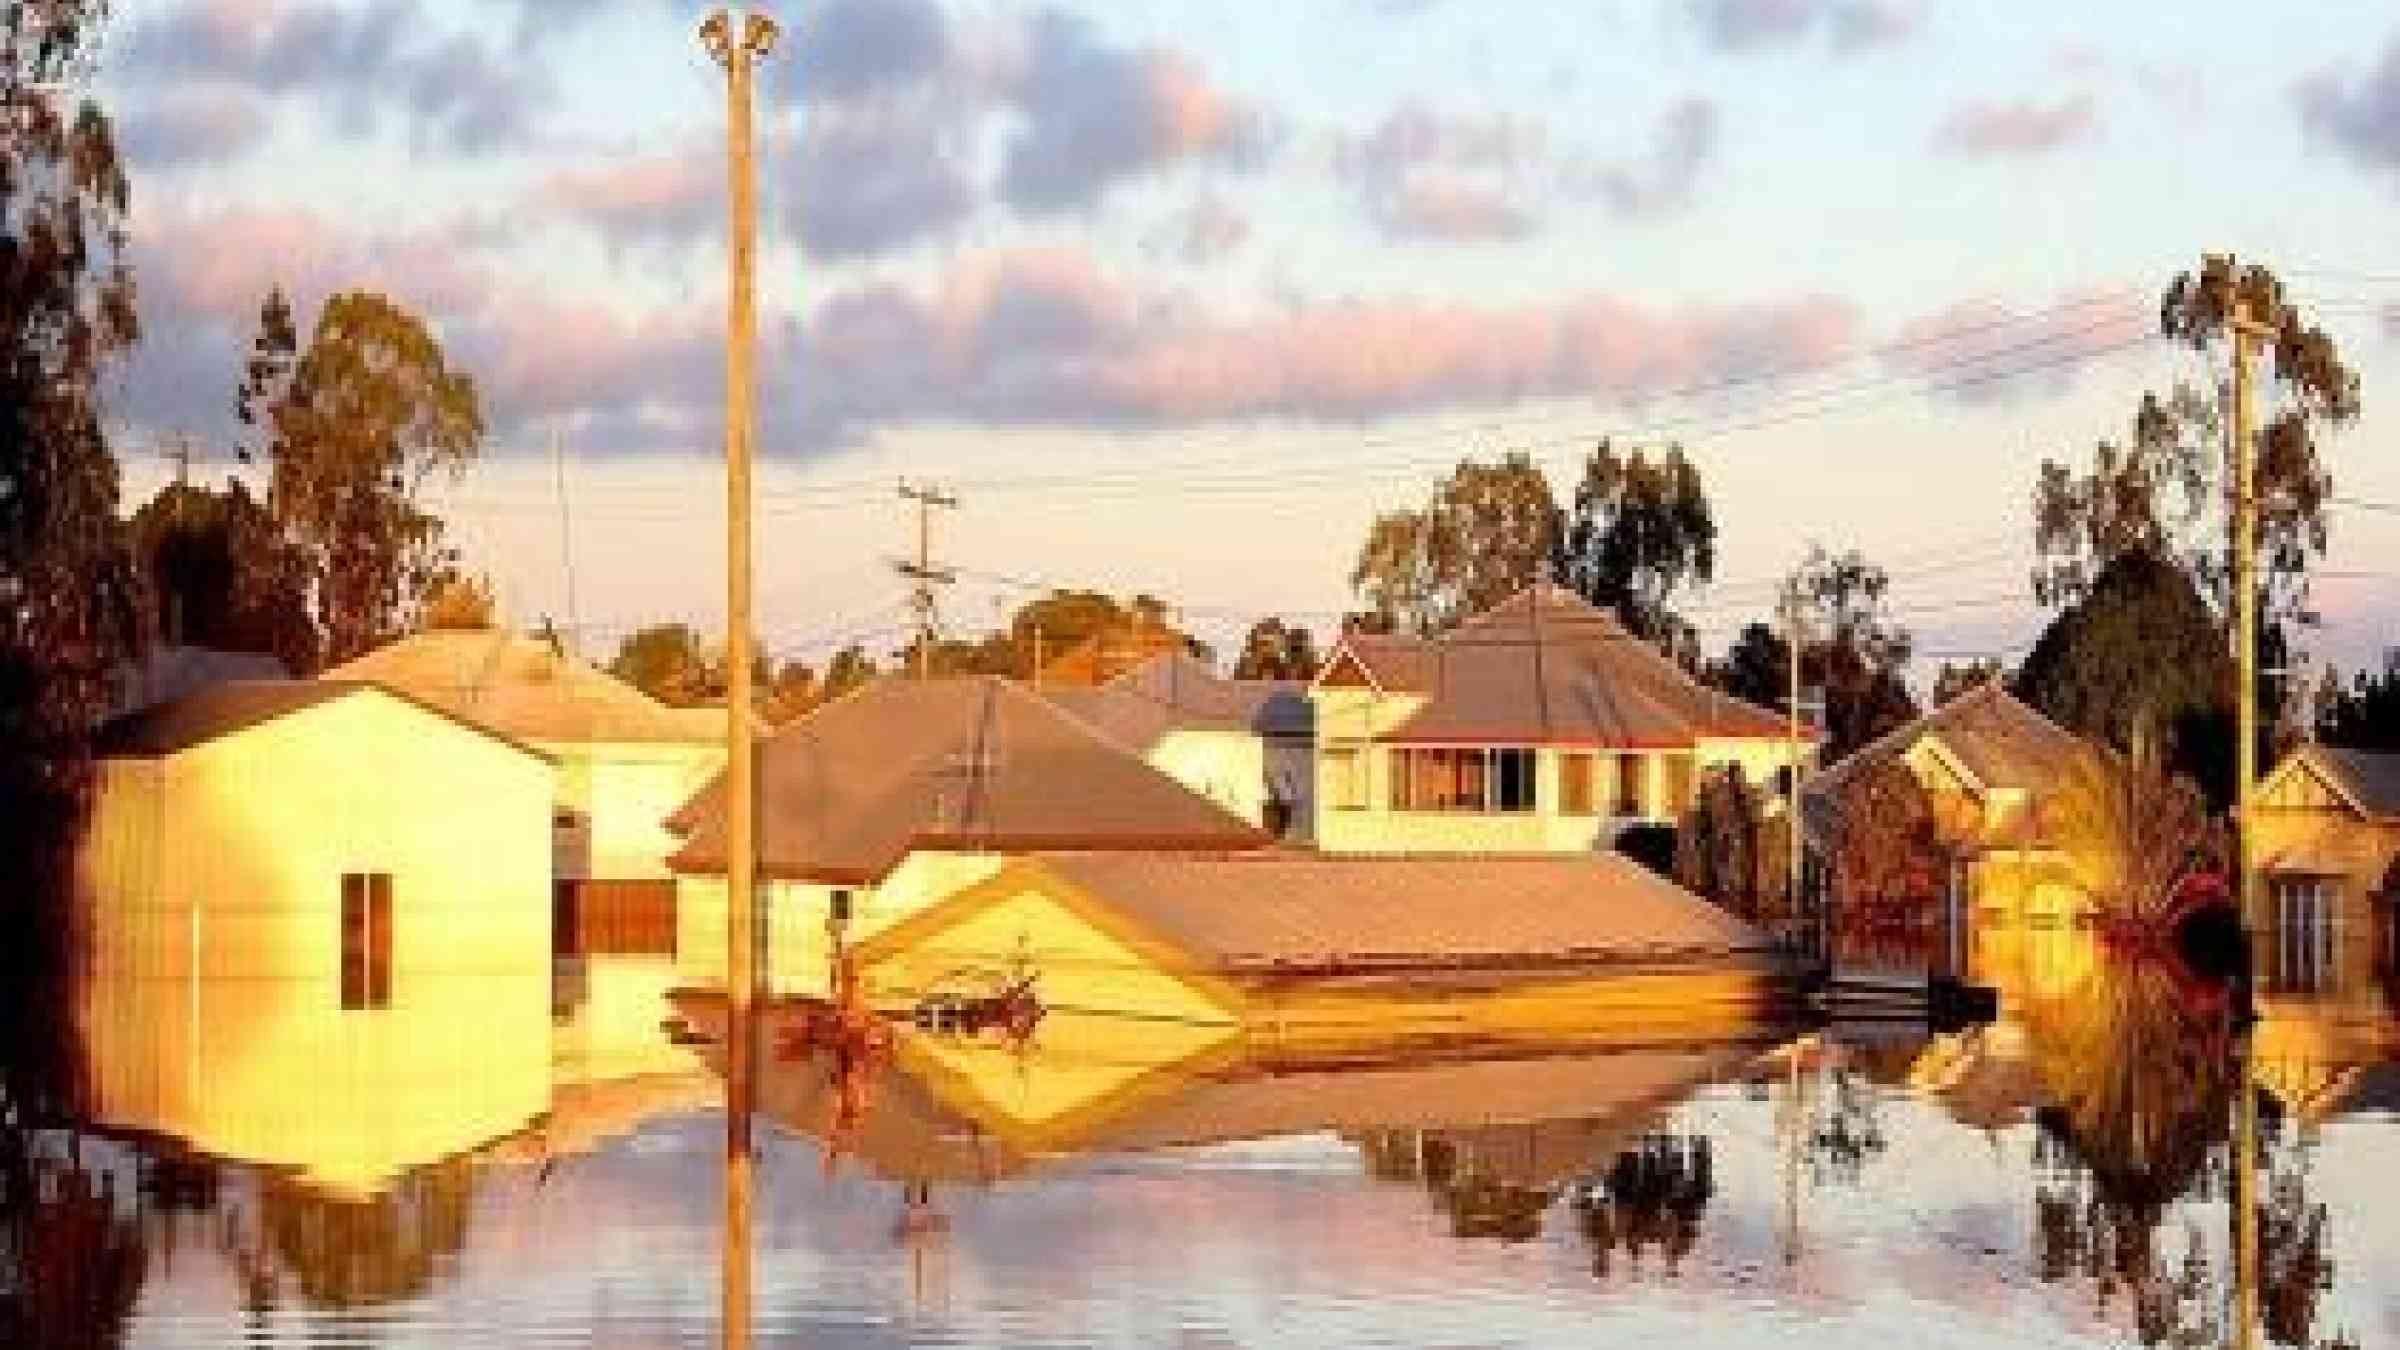 Australian businesses are working to boost community safety in the face of hazards such as flooding (Photo: Australian Business Roundtable)